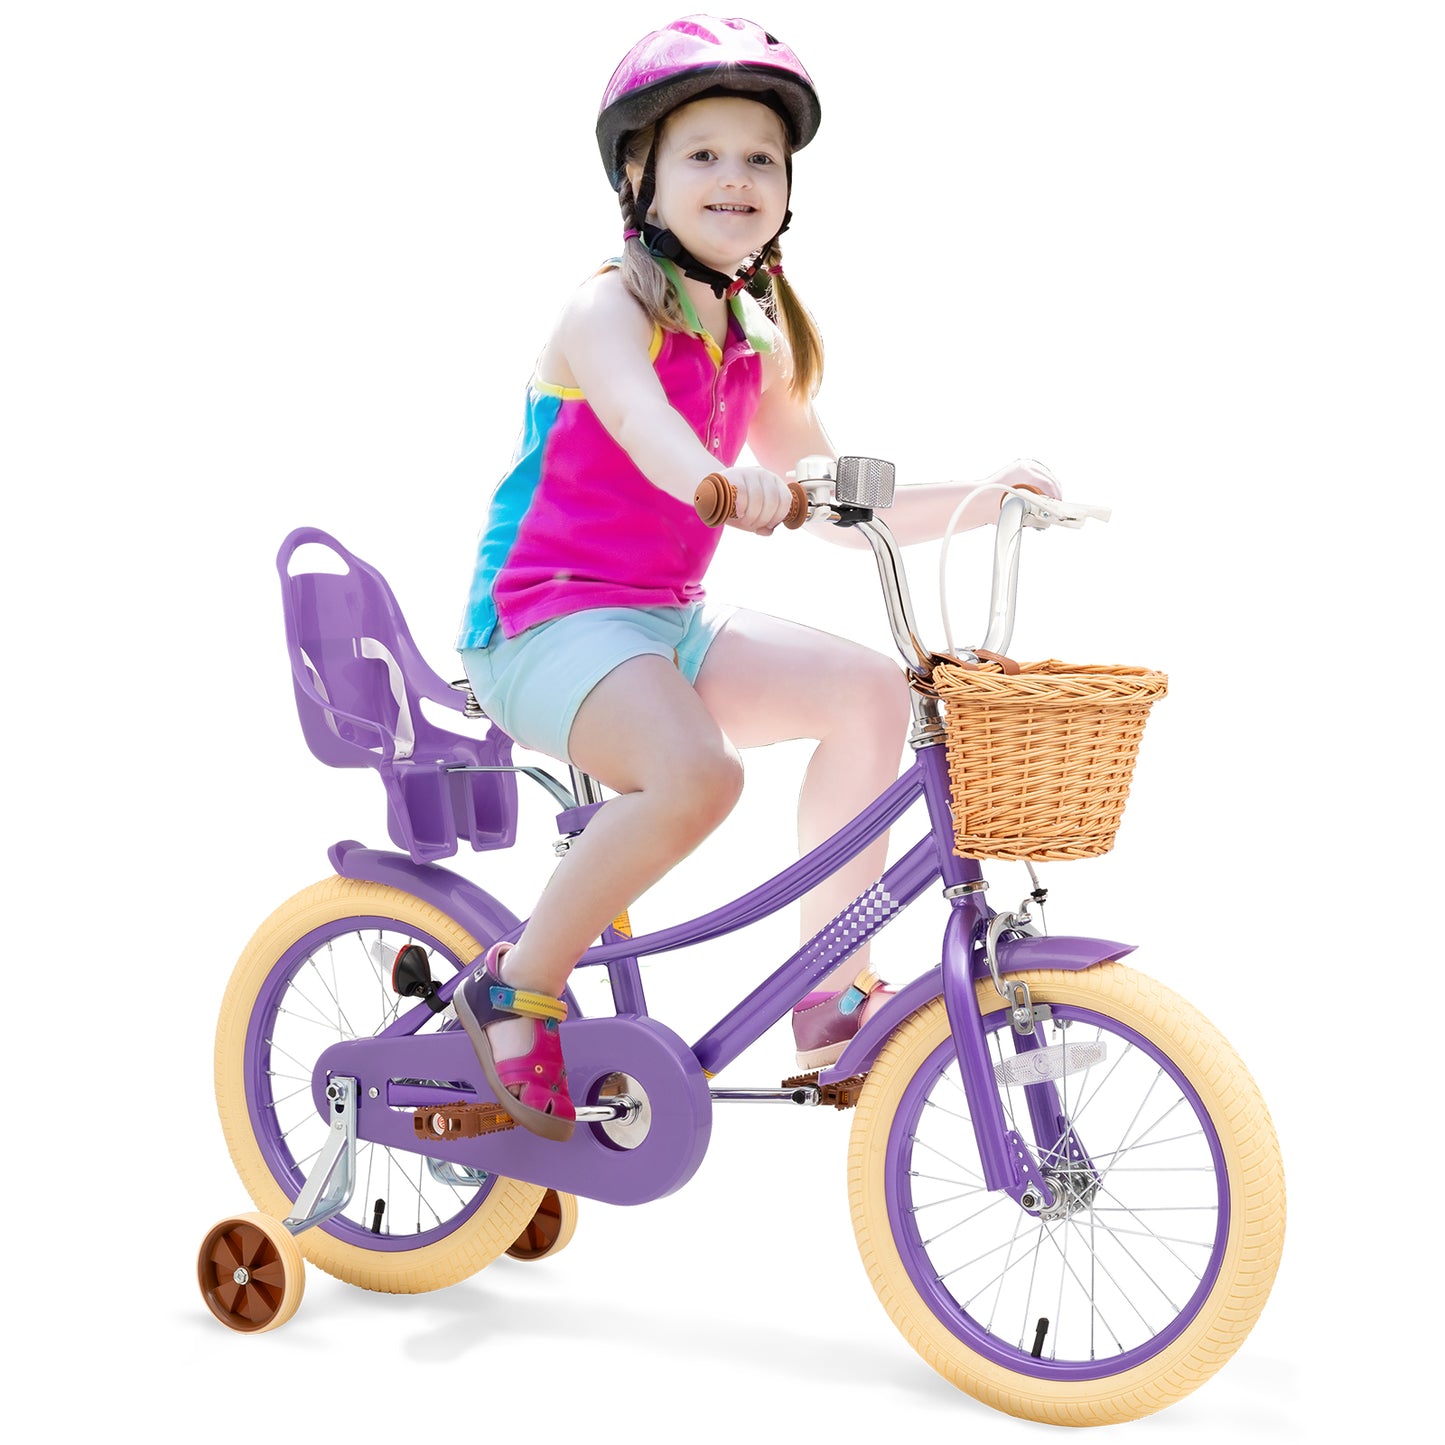 XJD 16 inch Kids Girls Bike for Ages 4-7 Years Child Toddler Bike with Basket and Bell Training Wheels, Adjustable Seat Handlebar Height